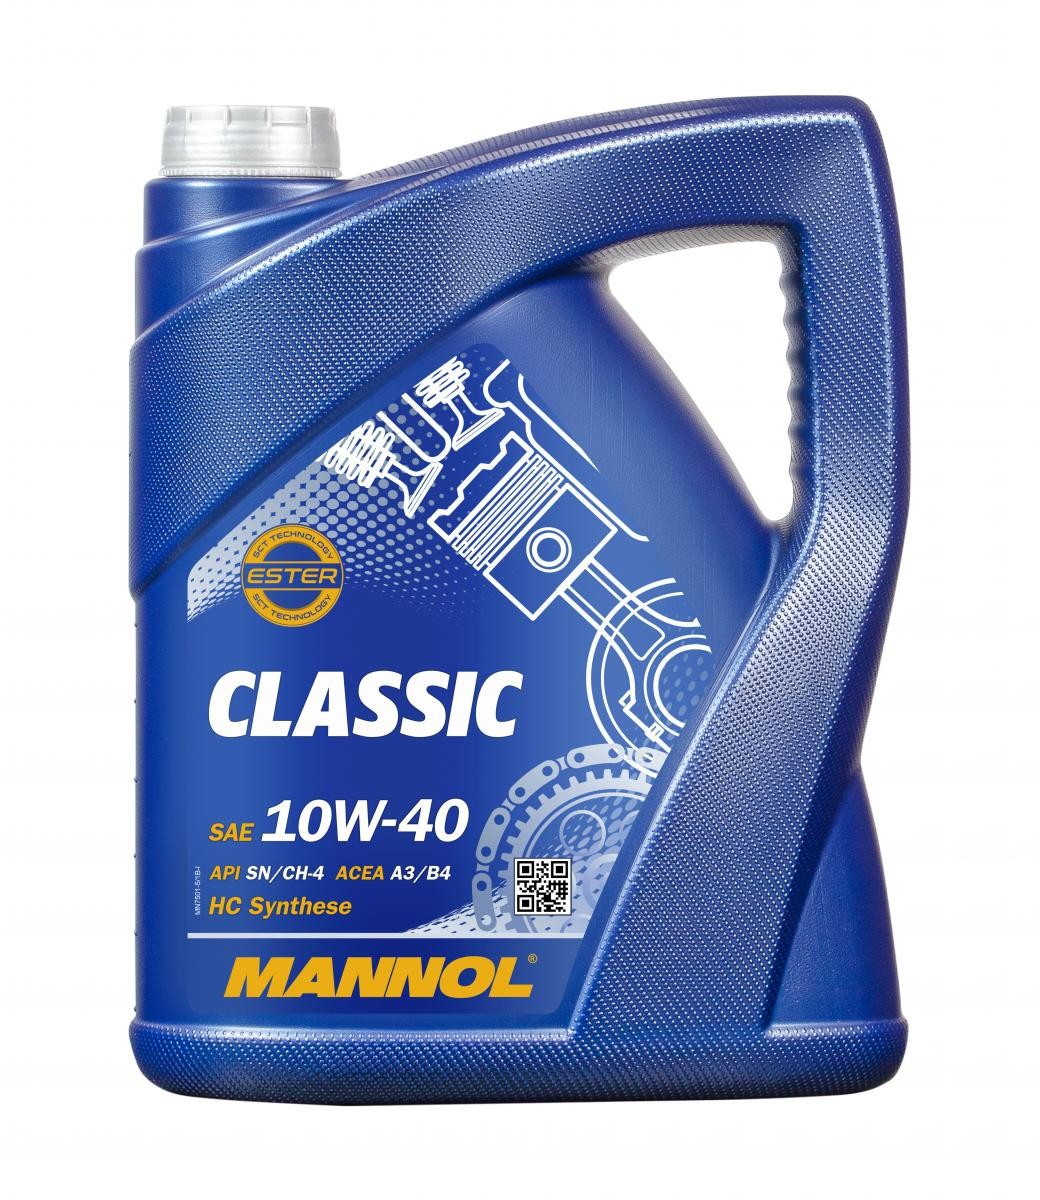 Engine oil MB 229.3 MANNOL - MN7501-5 ContiClassic